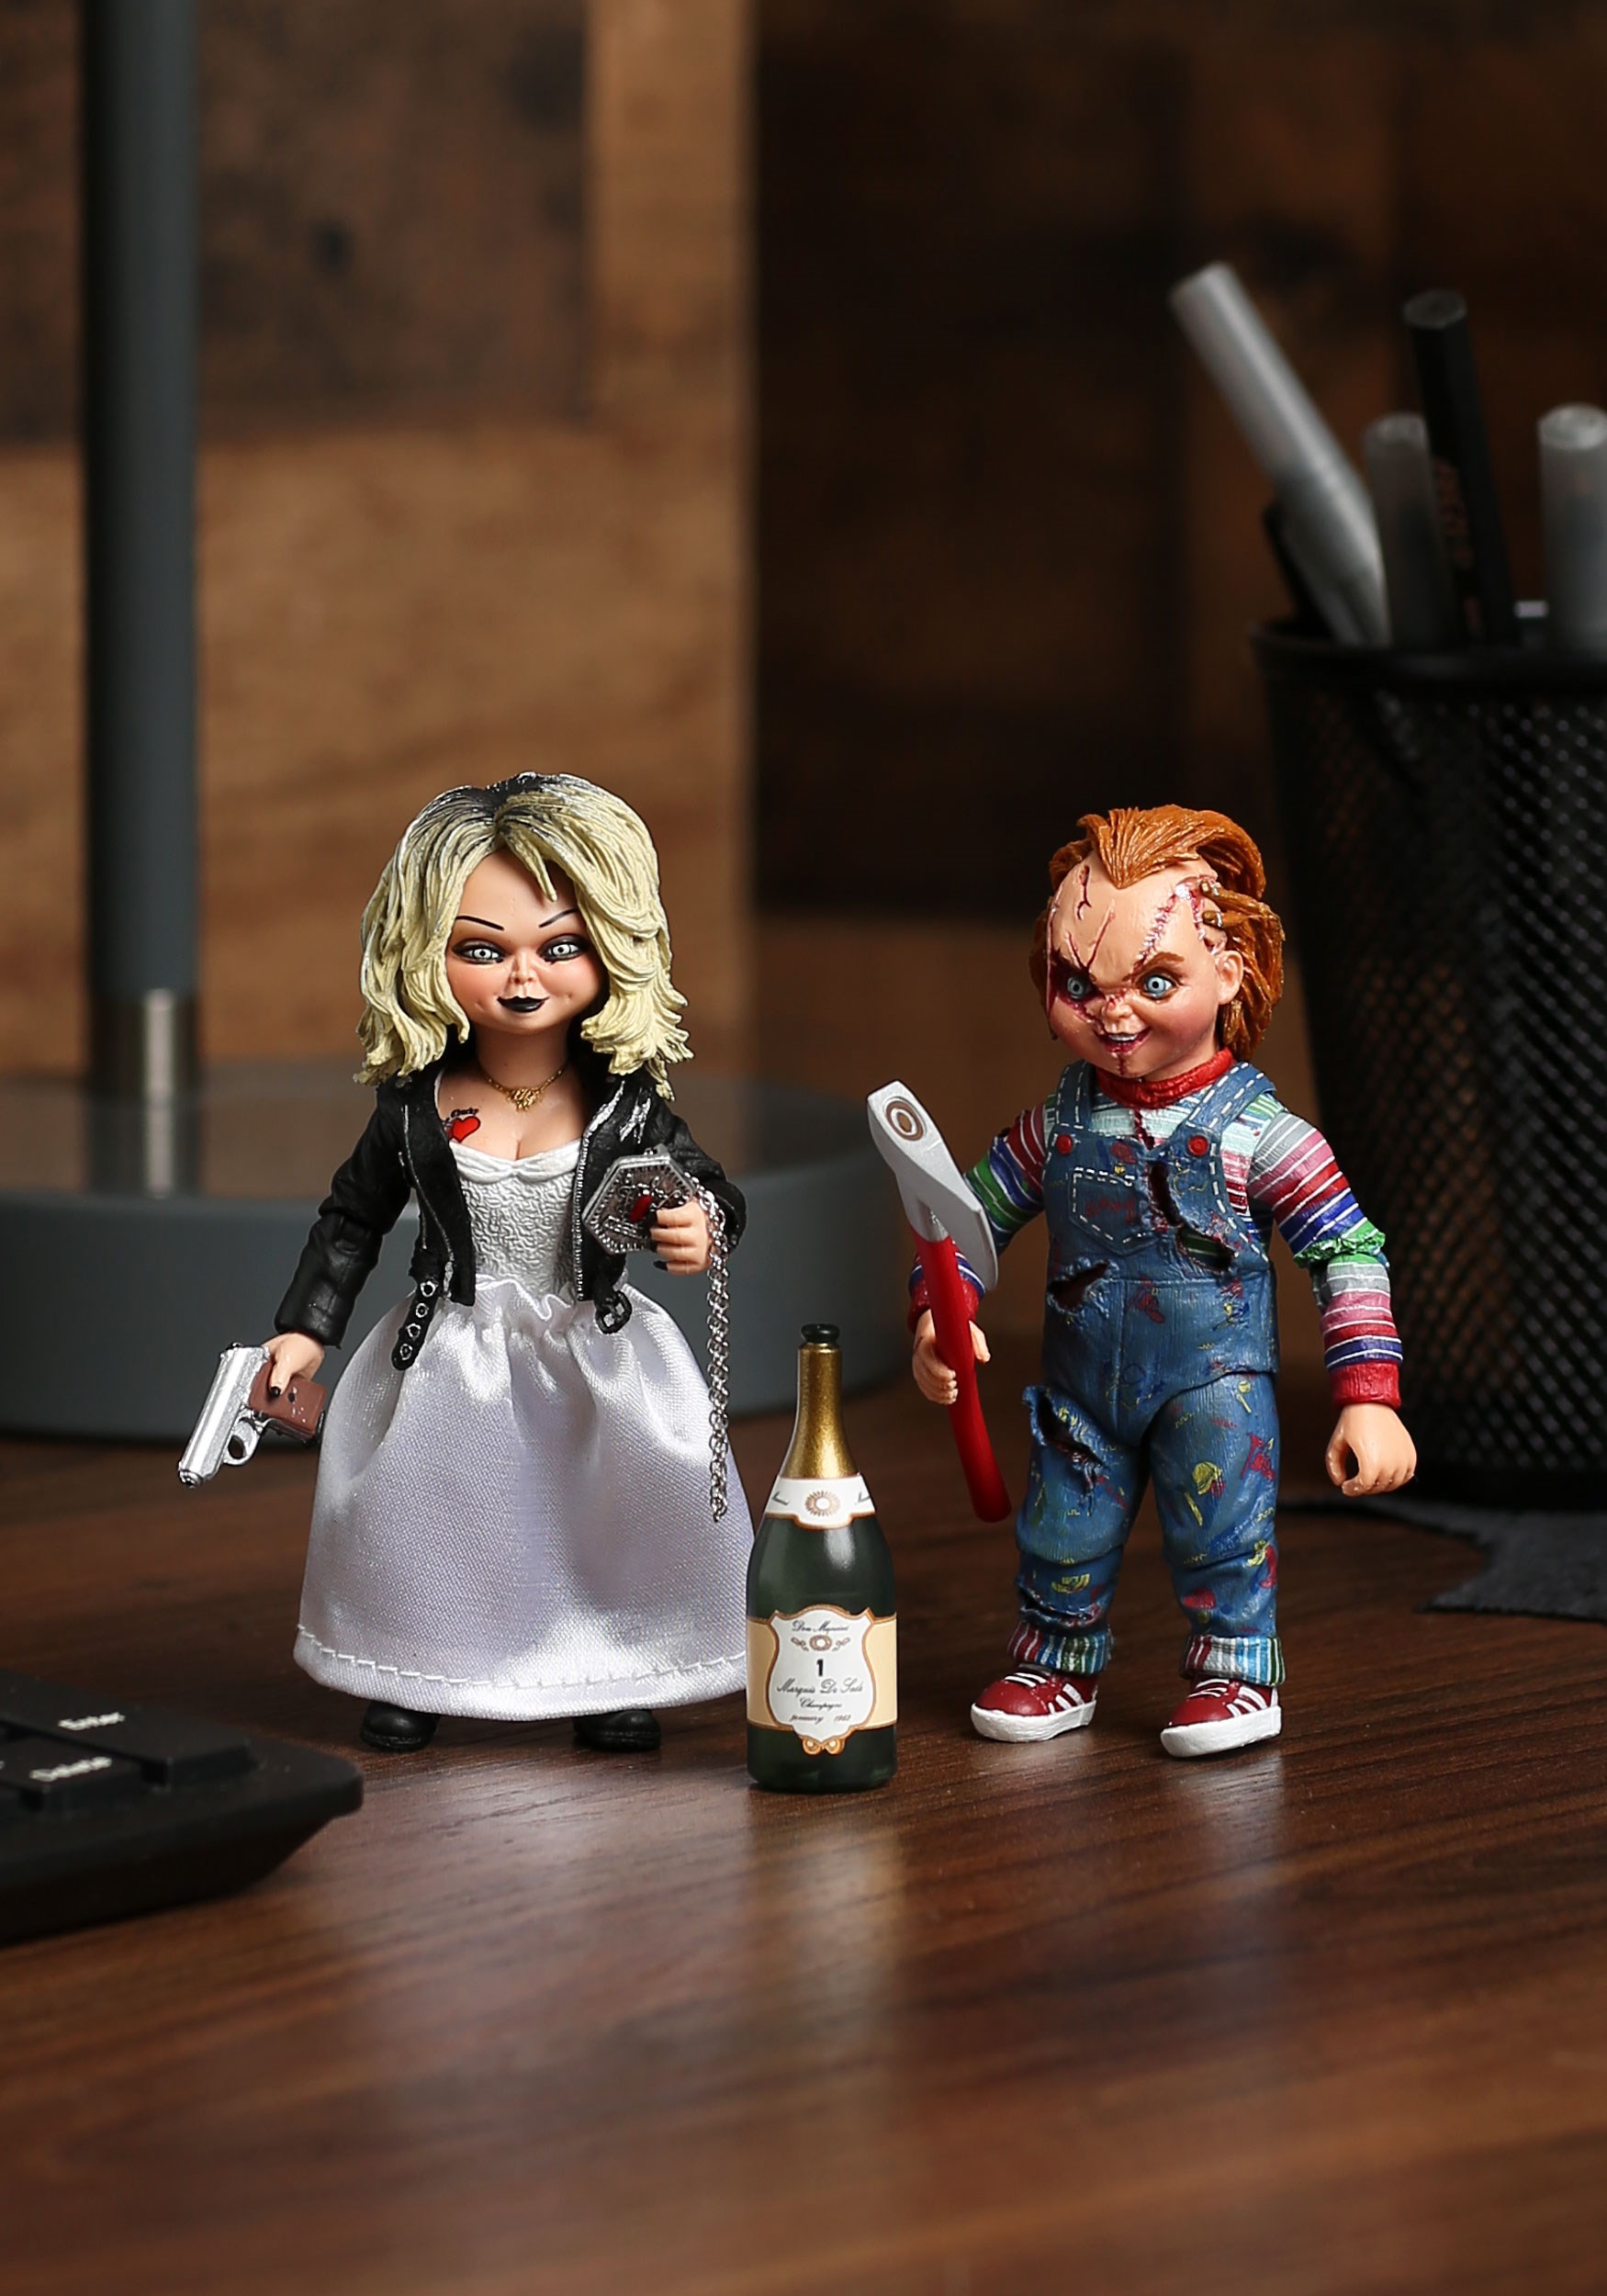 2-Pack Chucky & Tiffany 7" Scale Action Figure